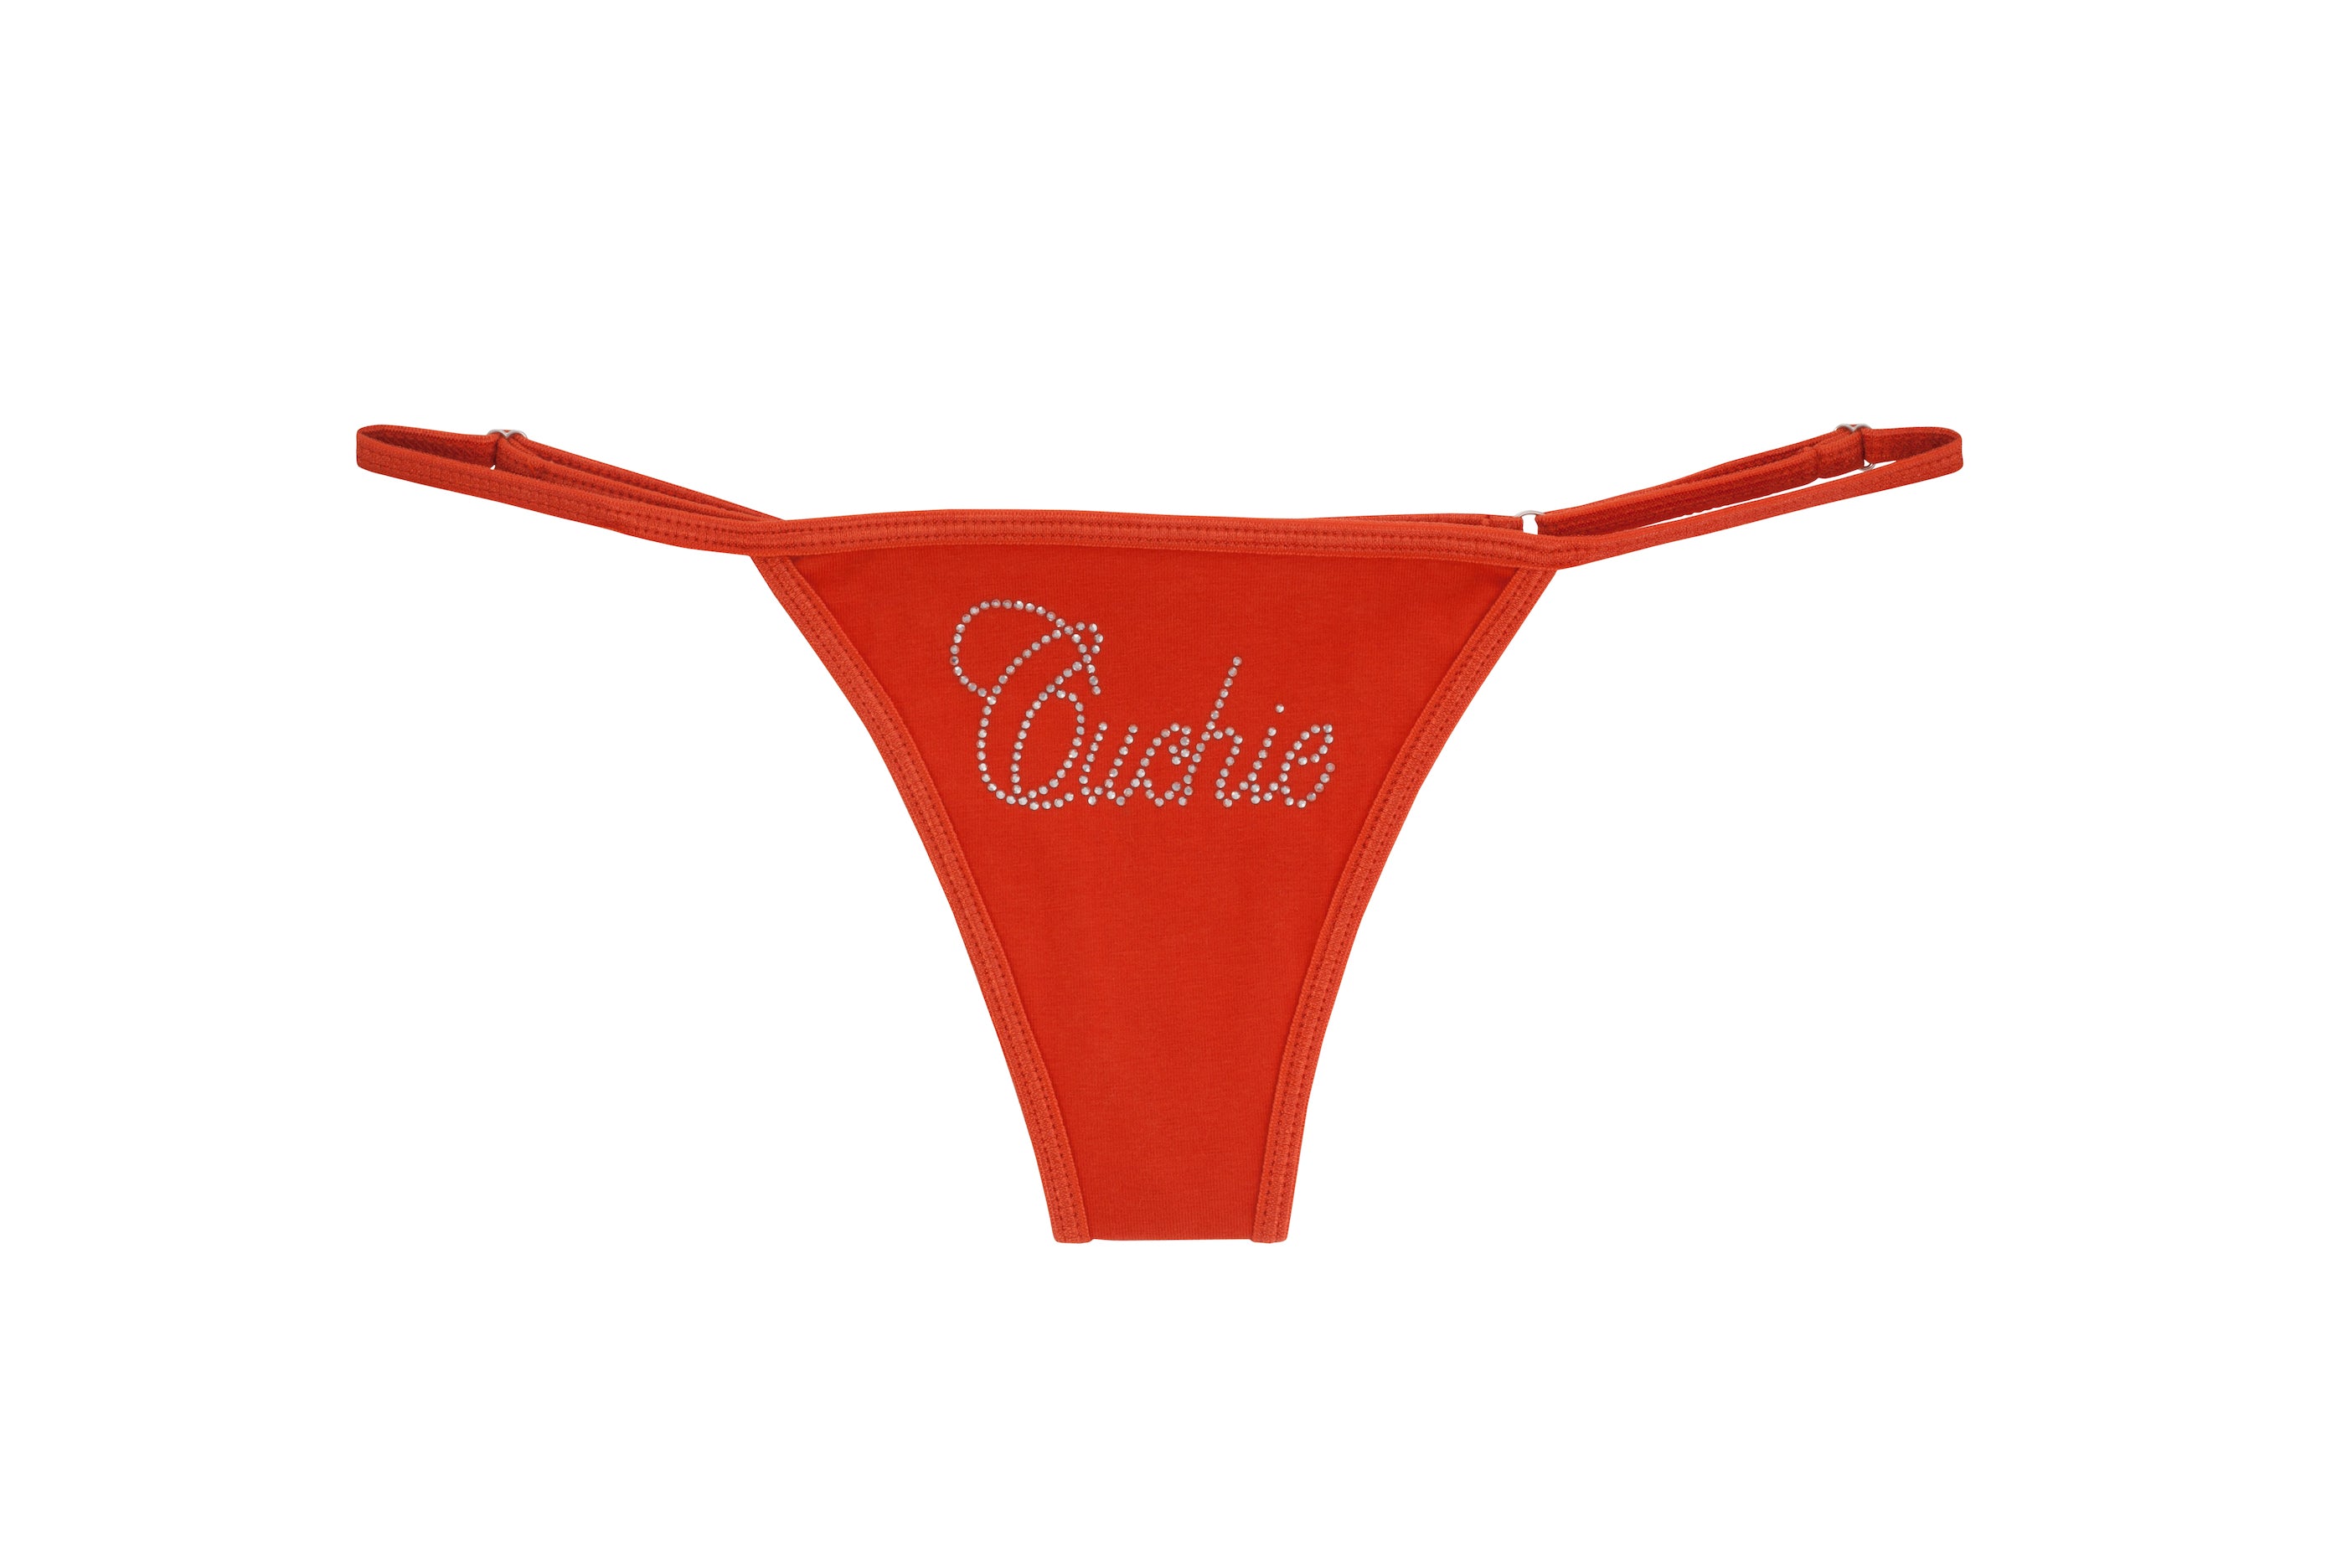 Amber thong with "Cuchie" text in rhinestones